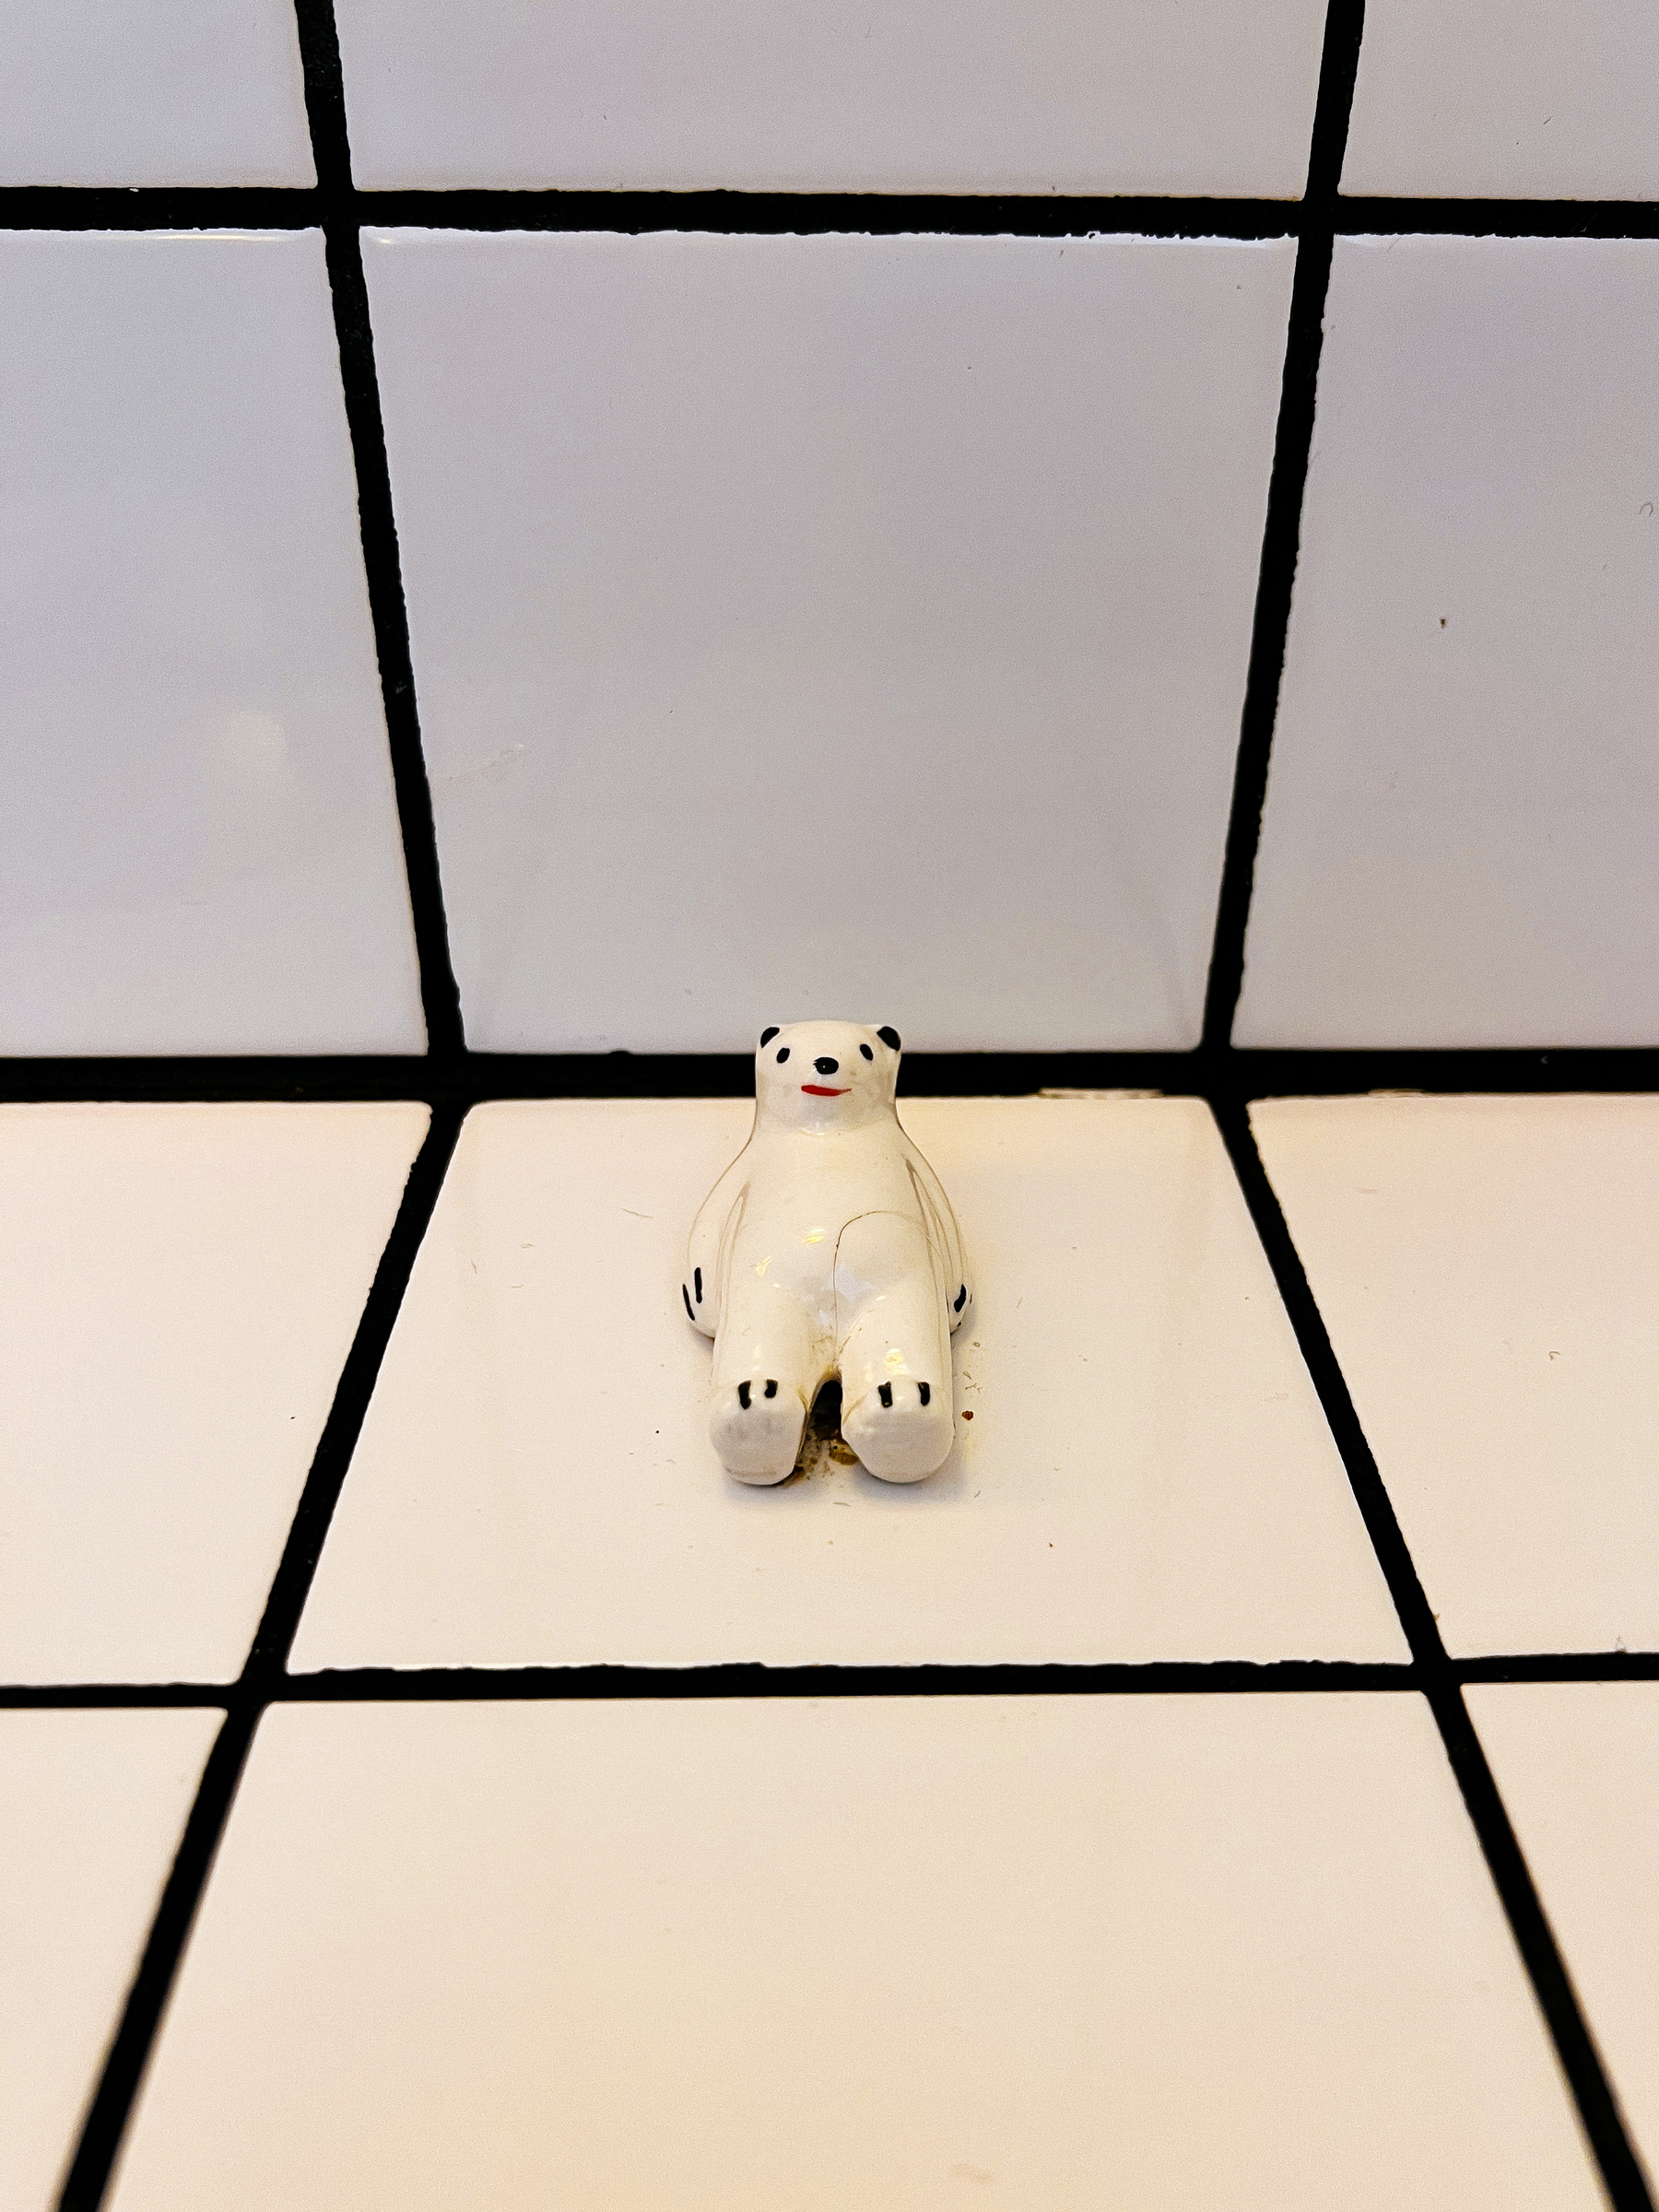 A toy white bear chilling on white tiles. Strange, but it is what it is. 